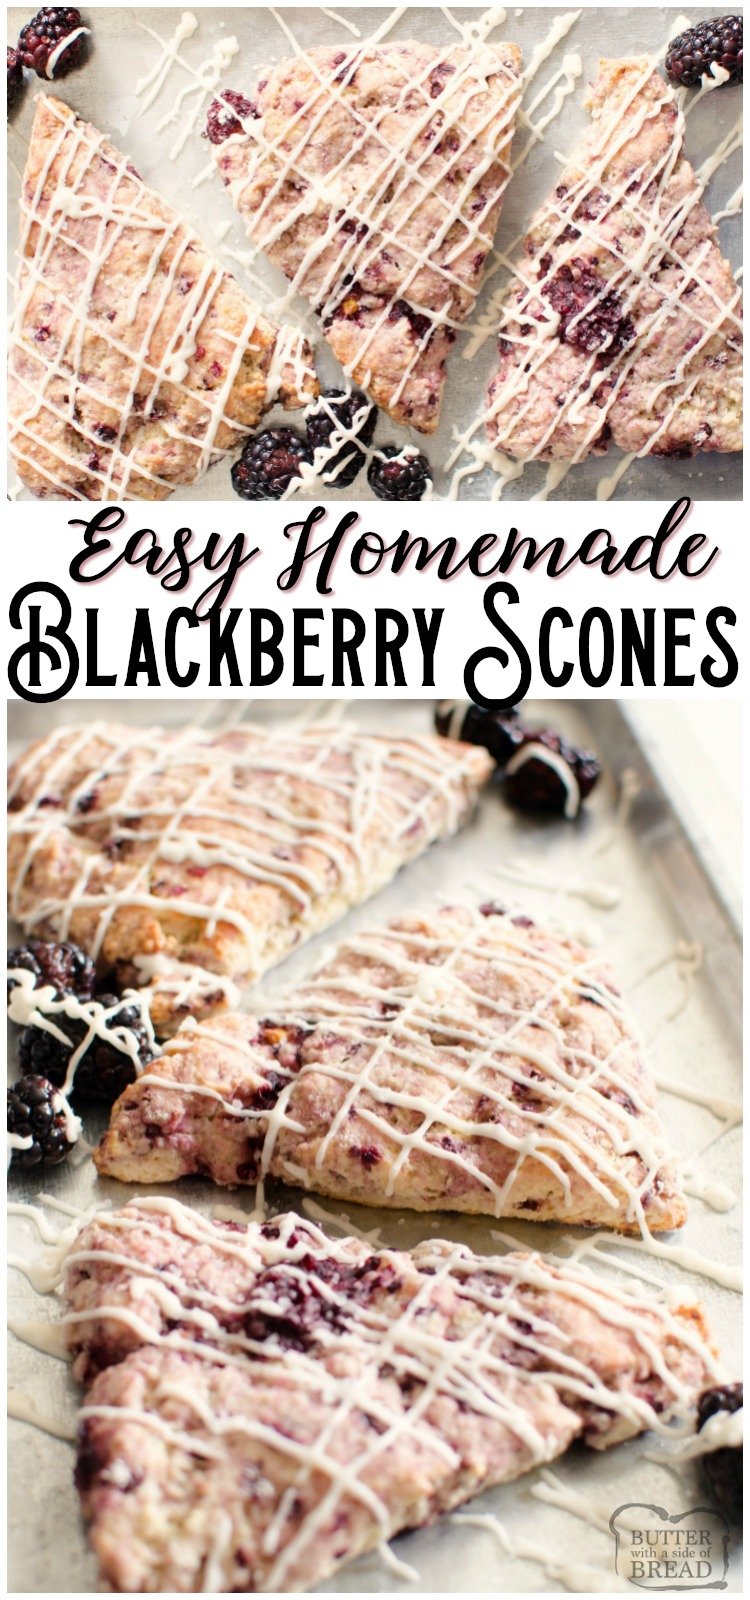 Easy Homemade Blackberry Scone recipe for buttery, soft & flavorful scones. Easily the best scone recipe ever! Good with blueberries & strawberries too! #scone #recipe #baking #scones #butter #blackberries #berries #breakfast #bread from BUTTER WITH A SIDE OF BREAD